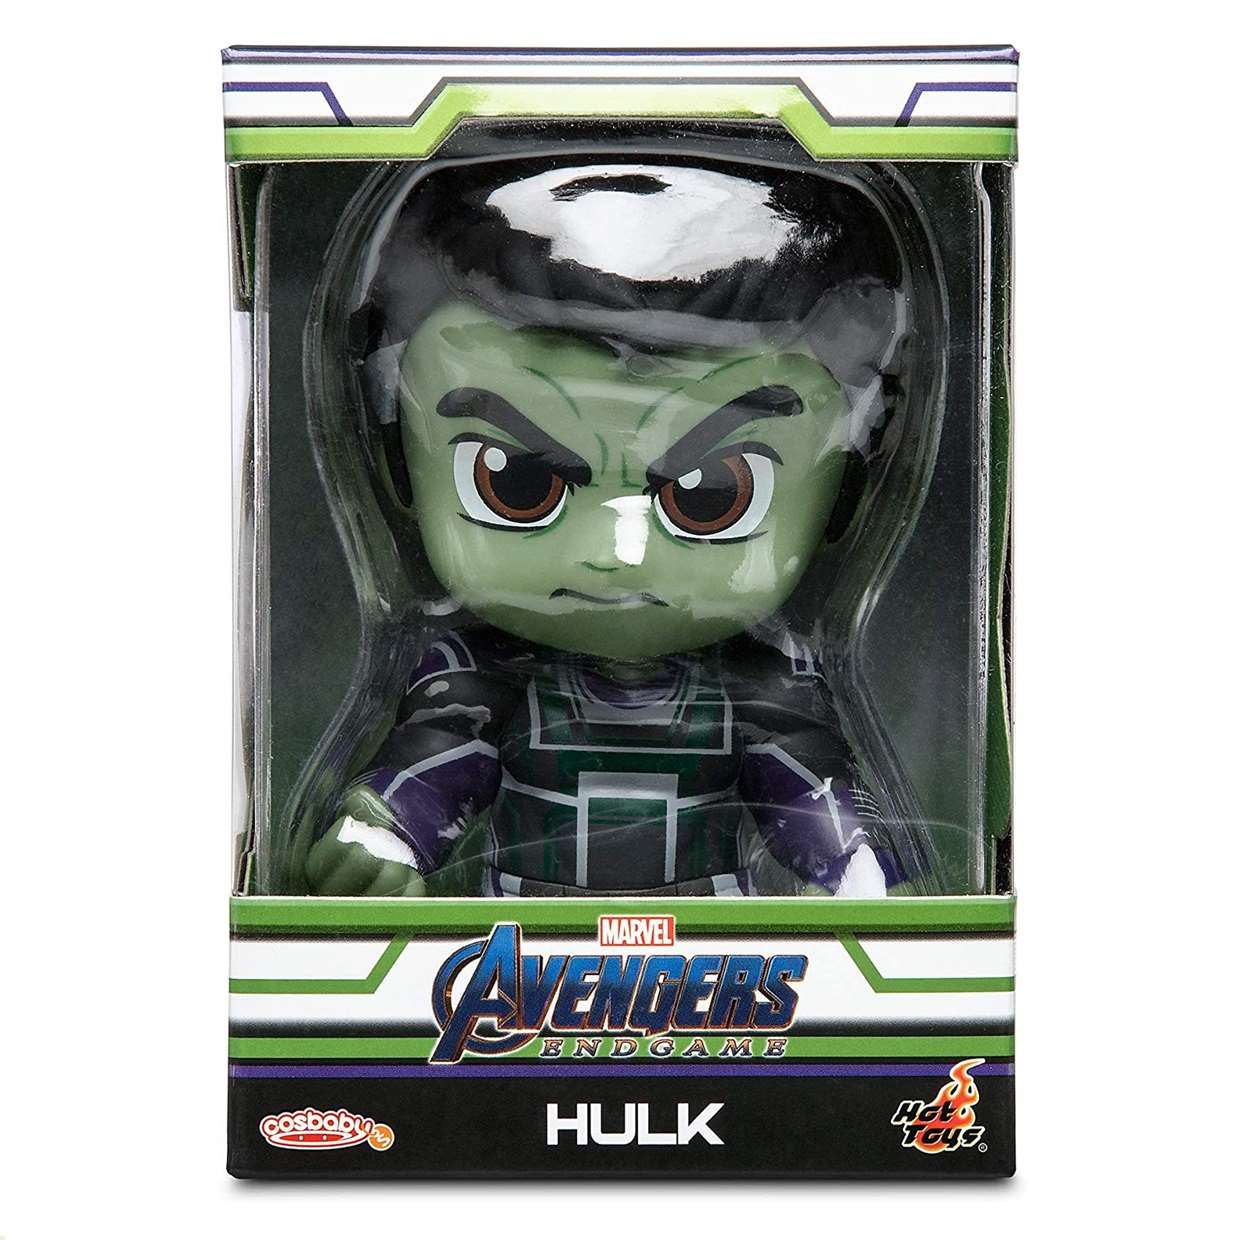 Hulk Cosb557 Marvel Avengers End Game Cosbaby Hot Toys